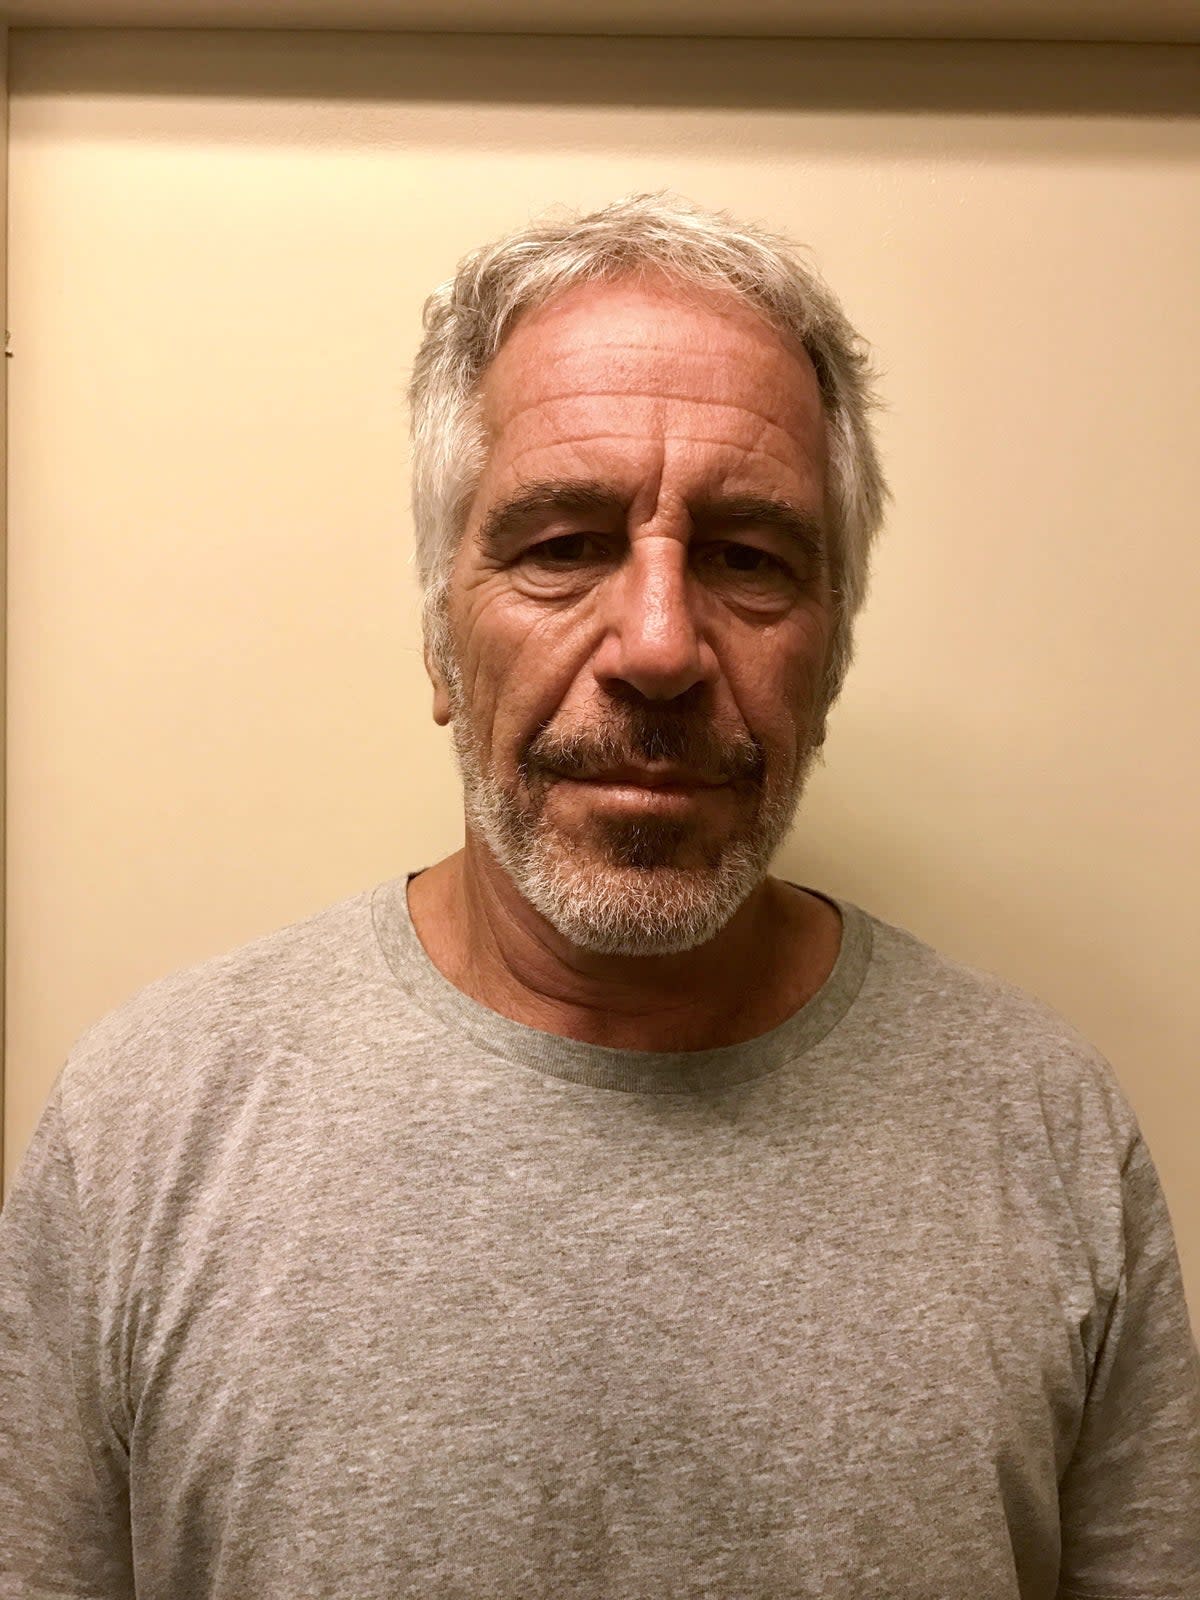 Jeffrey Epstein killed himself while awaiting trial on sex trafficking charges (EPA)